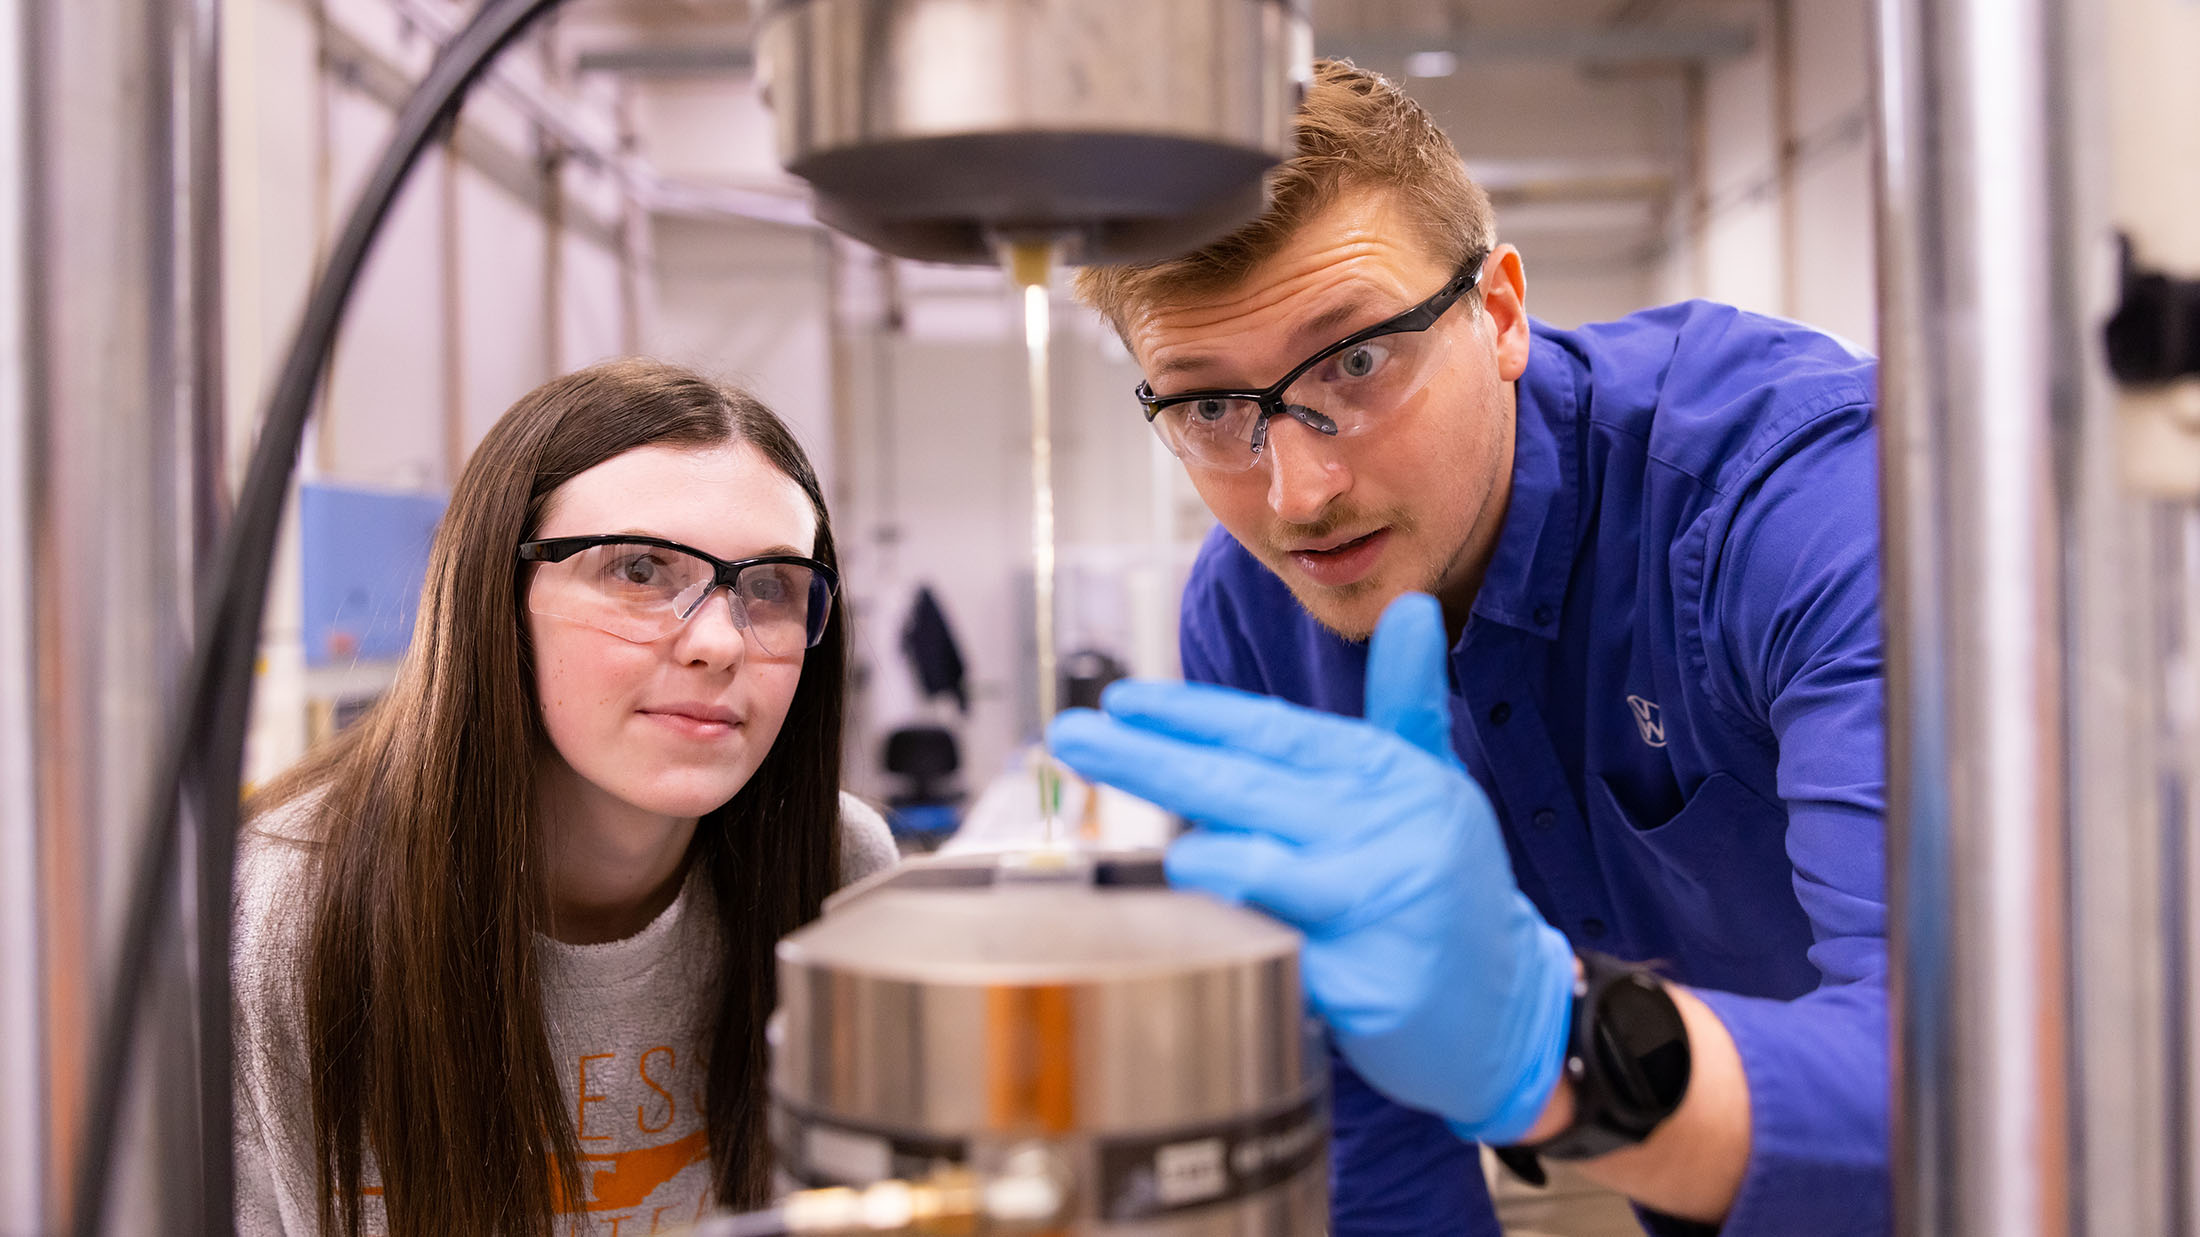 William Henken, a Volkswagen Doctoral Fellow, wears a Volkswagen shirt and helps a female student during a tensile testing of glass fiber reinforced polymeric (GFRP) composites.